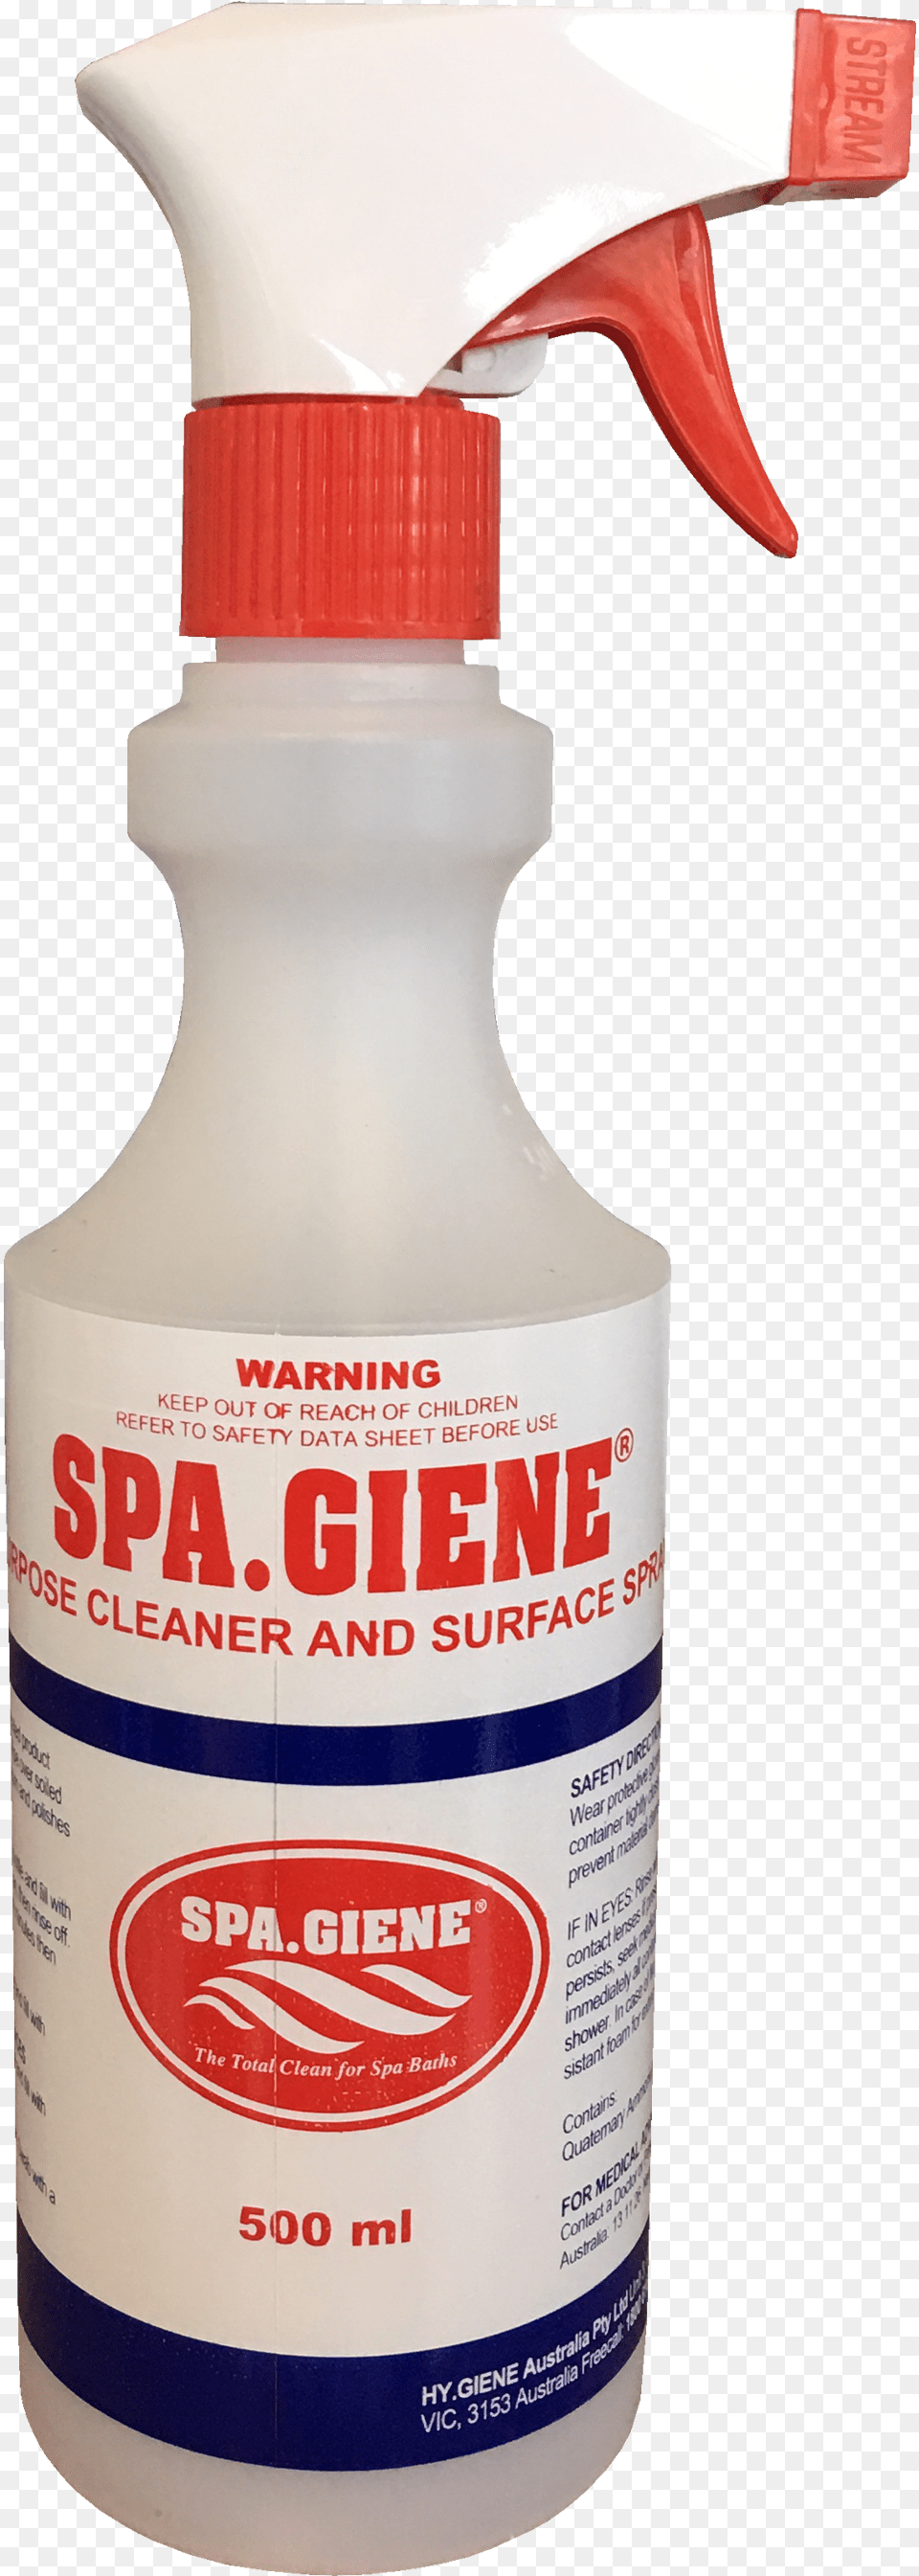 Giene 500ml Spray Bottle Liquid Hand Soap, Tin, Can, Spray Can Png Image